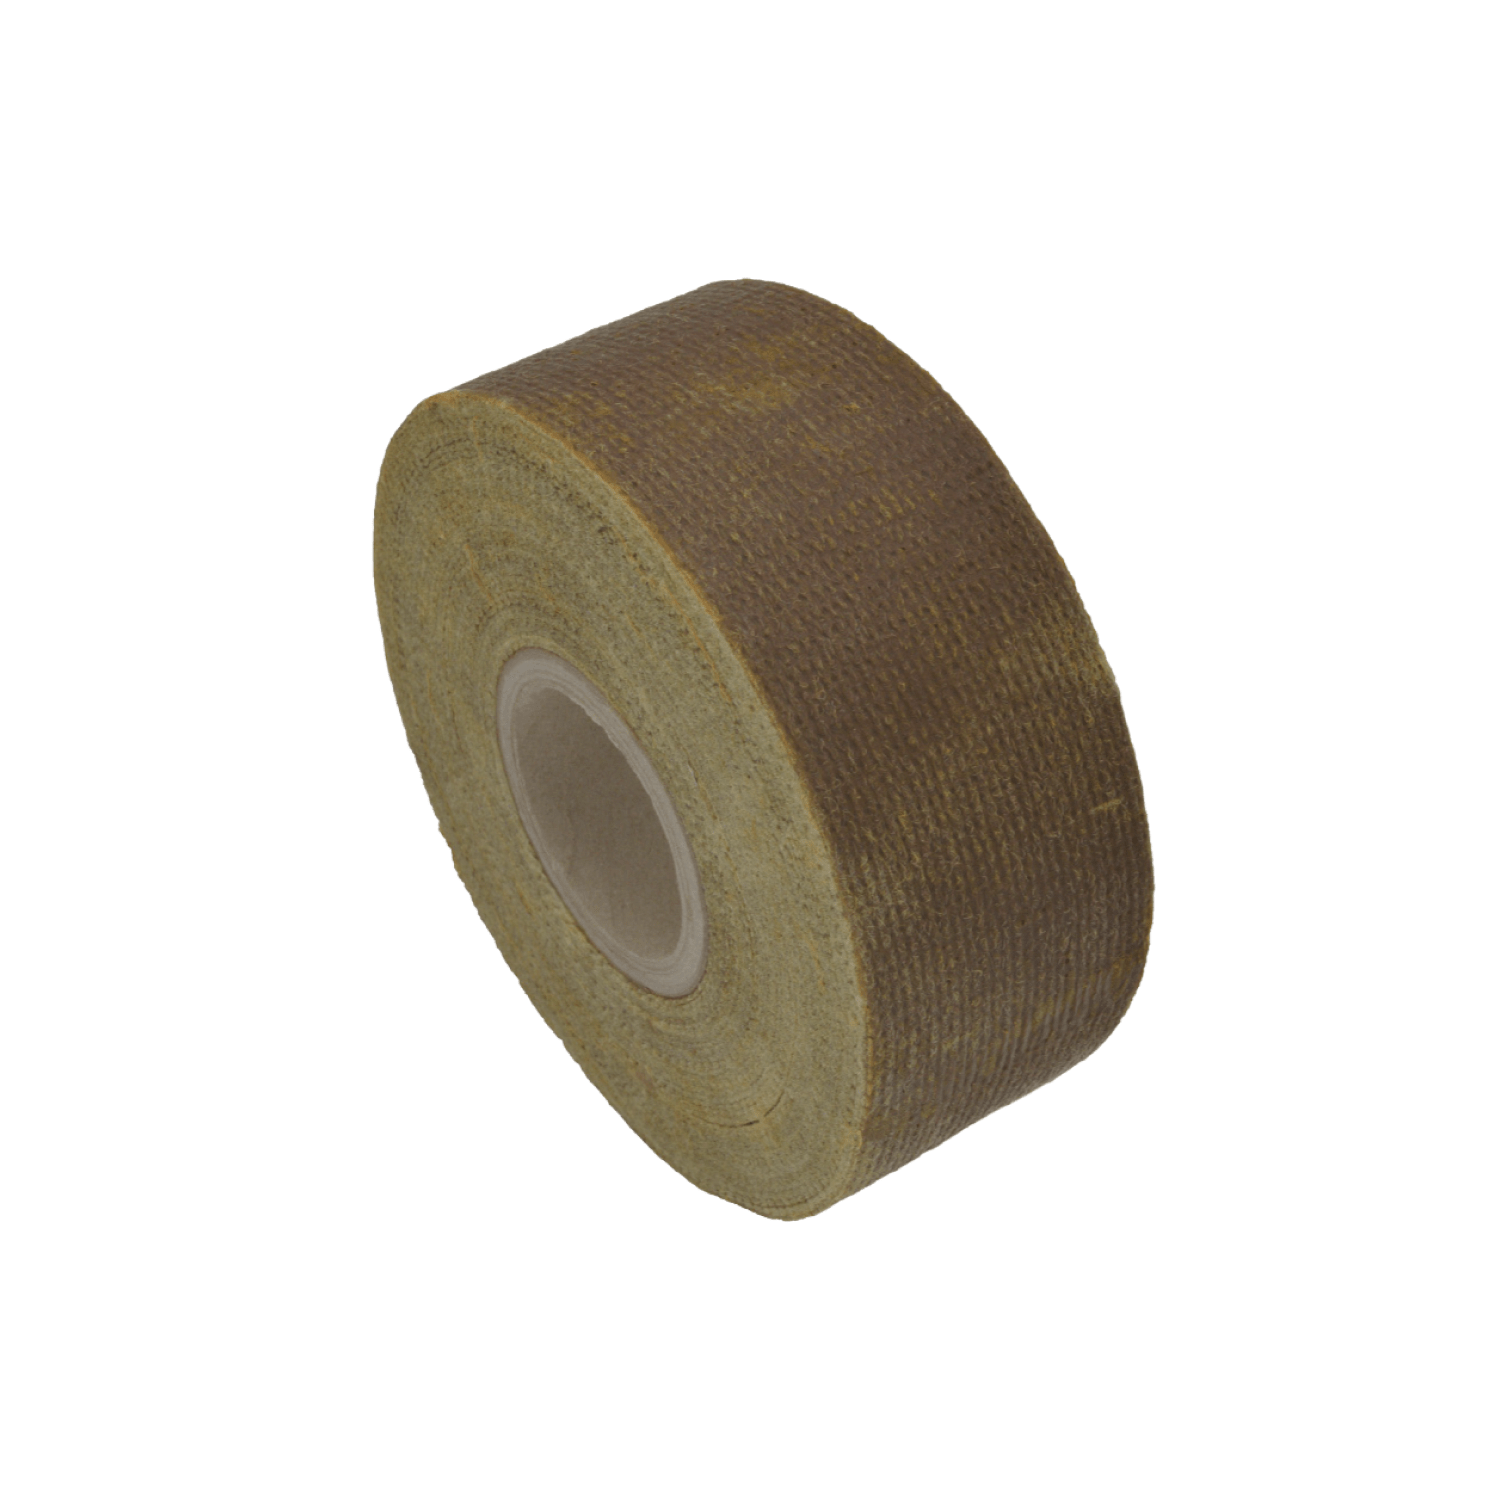 A single roll of the RustStop Petro Tape